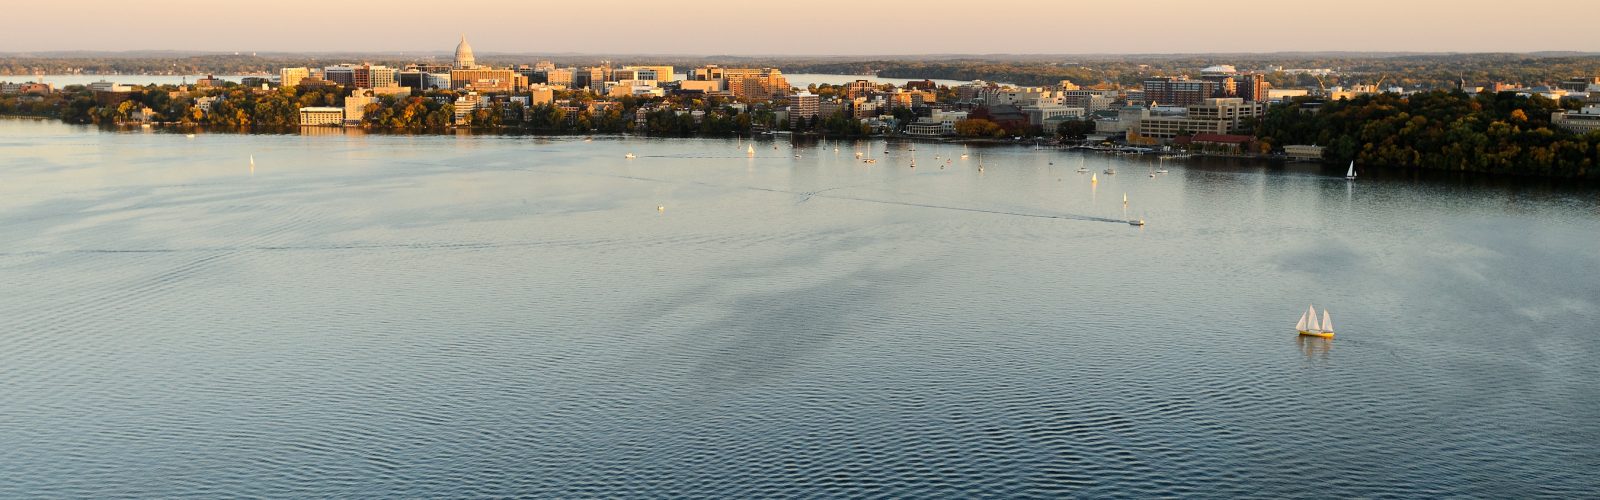 The Wisconsin State Capitol dots the downtown Madison skyline, at left, and the University of Wisconsin-Madison campus, at right, wraps along the Lake Mendota shoreline in an aerial view during an autumn sunset on Oct. 5, 2011. In the foreground are sailboats on Lake Mendota. In the background is Lake Monona, The photograph was made from a helicopter looking southeast. (Photo by Jeff Miller/UW-Madison)